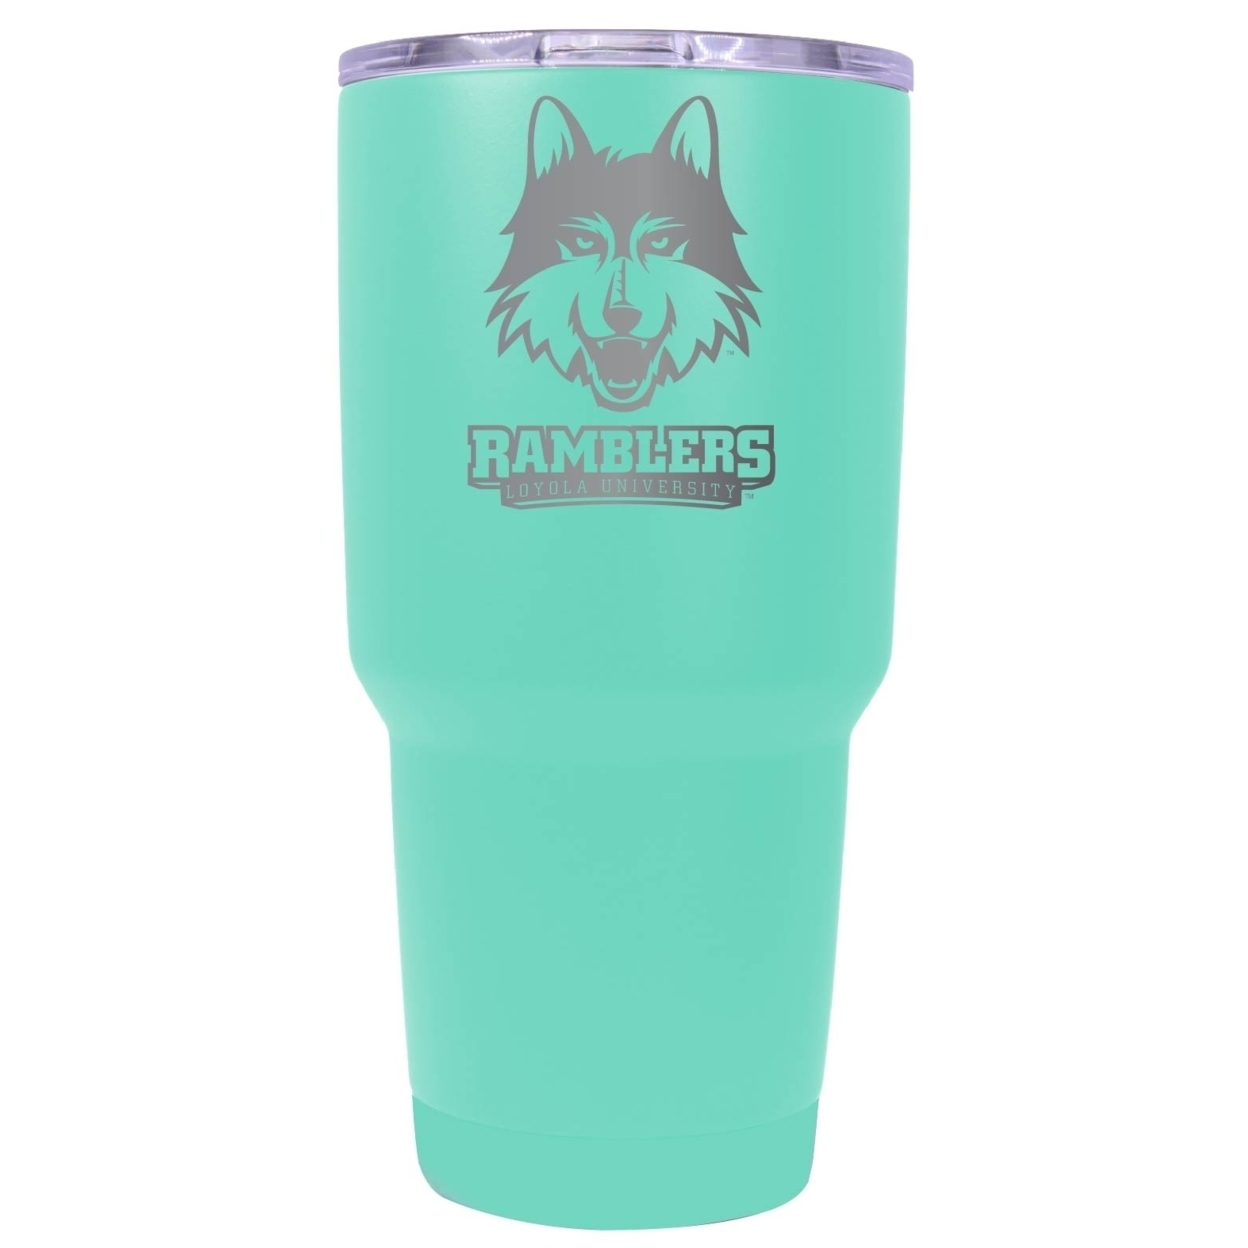 Loyola University Ramblers 30 Oz Laser Engraved Stainless Steel Insulated Tumbler Choose Your Color.